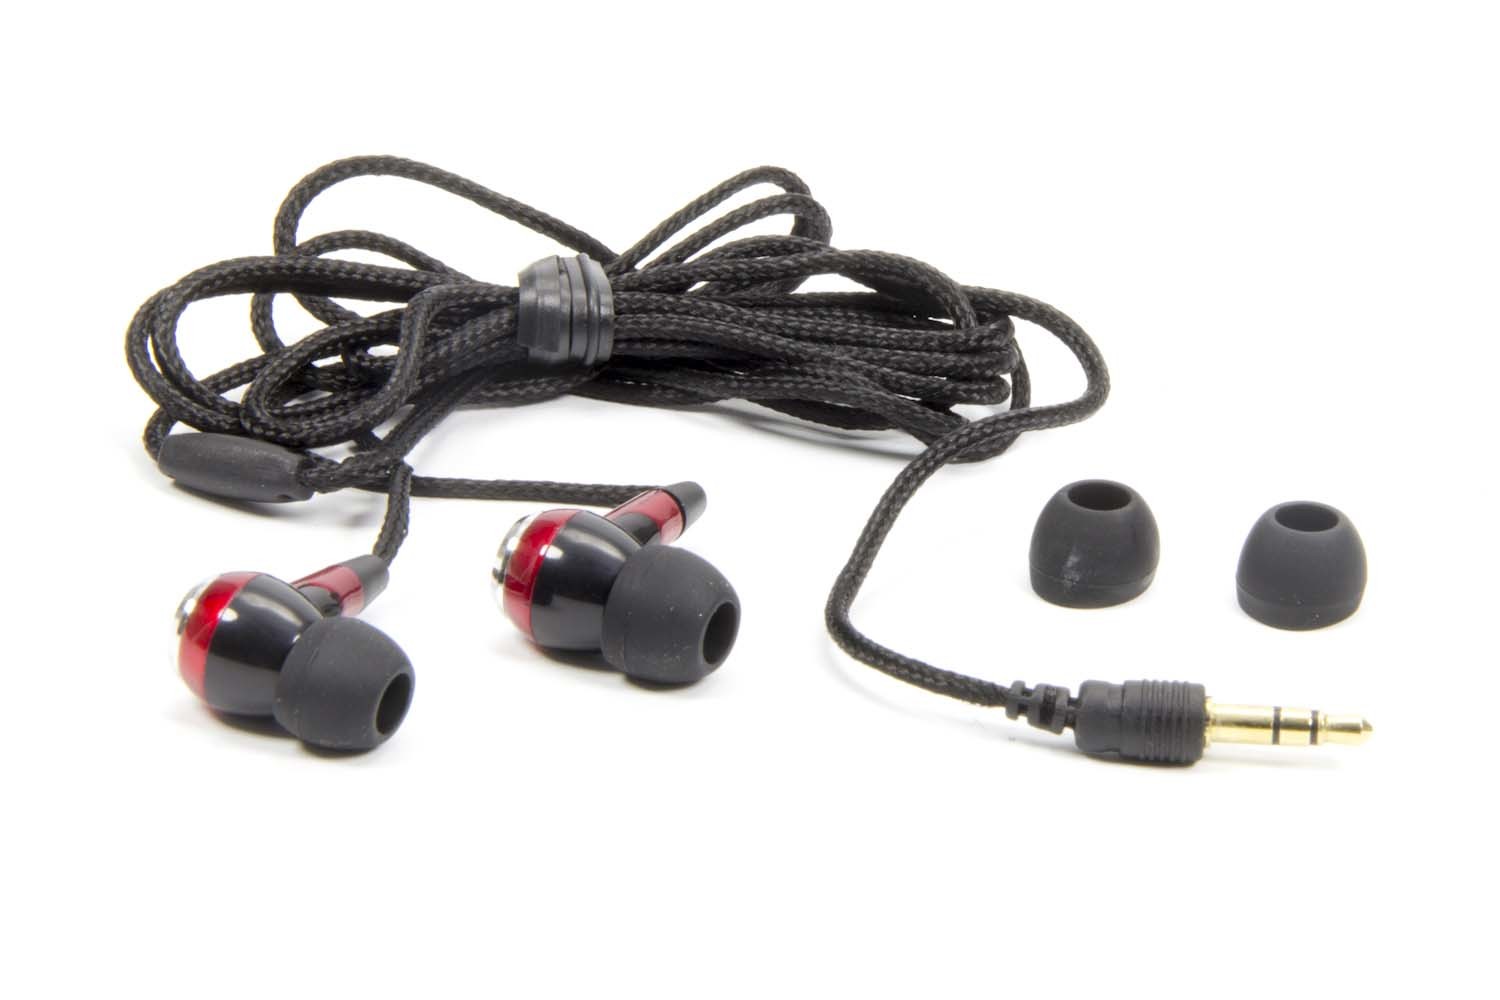 Raceceiver EP900R Headphones, Rookie, 48 in Cord, 3.5 mm Input Jack, Small / Medium / Large Rubber Ear Inserts, Each